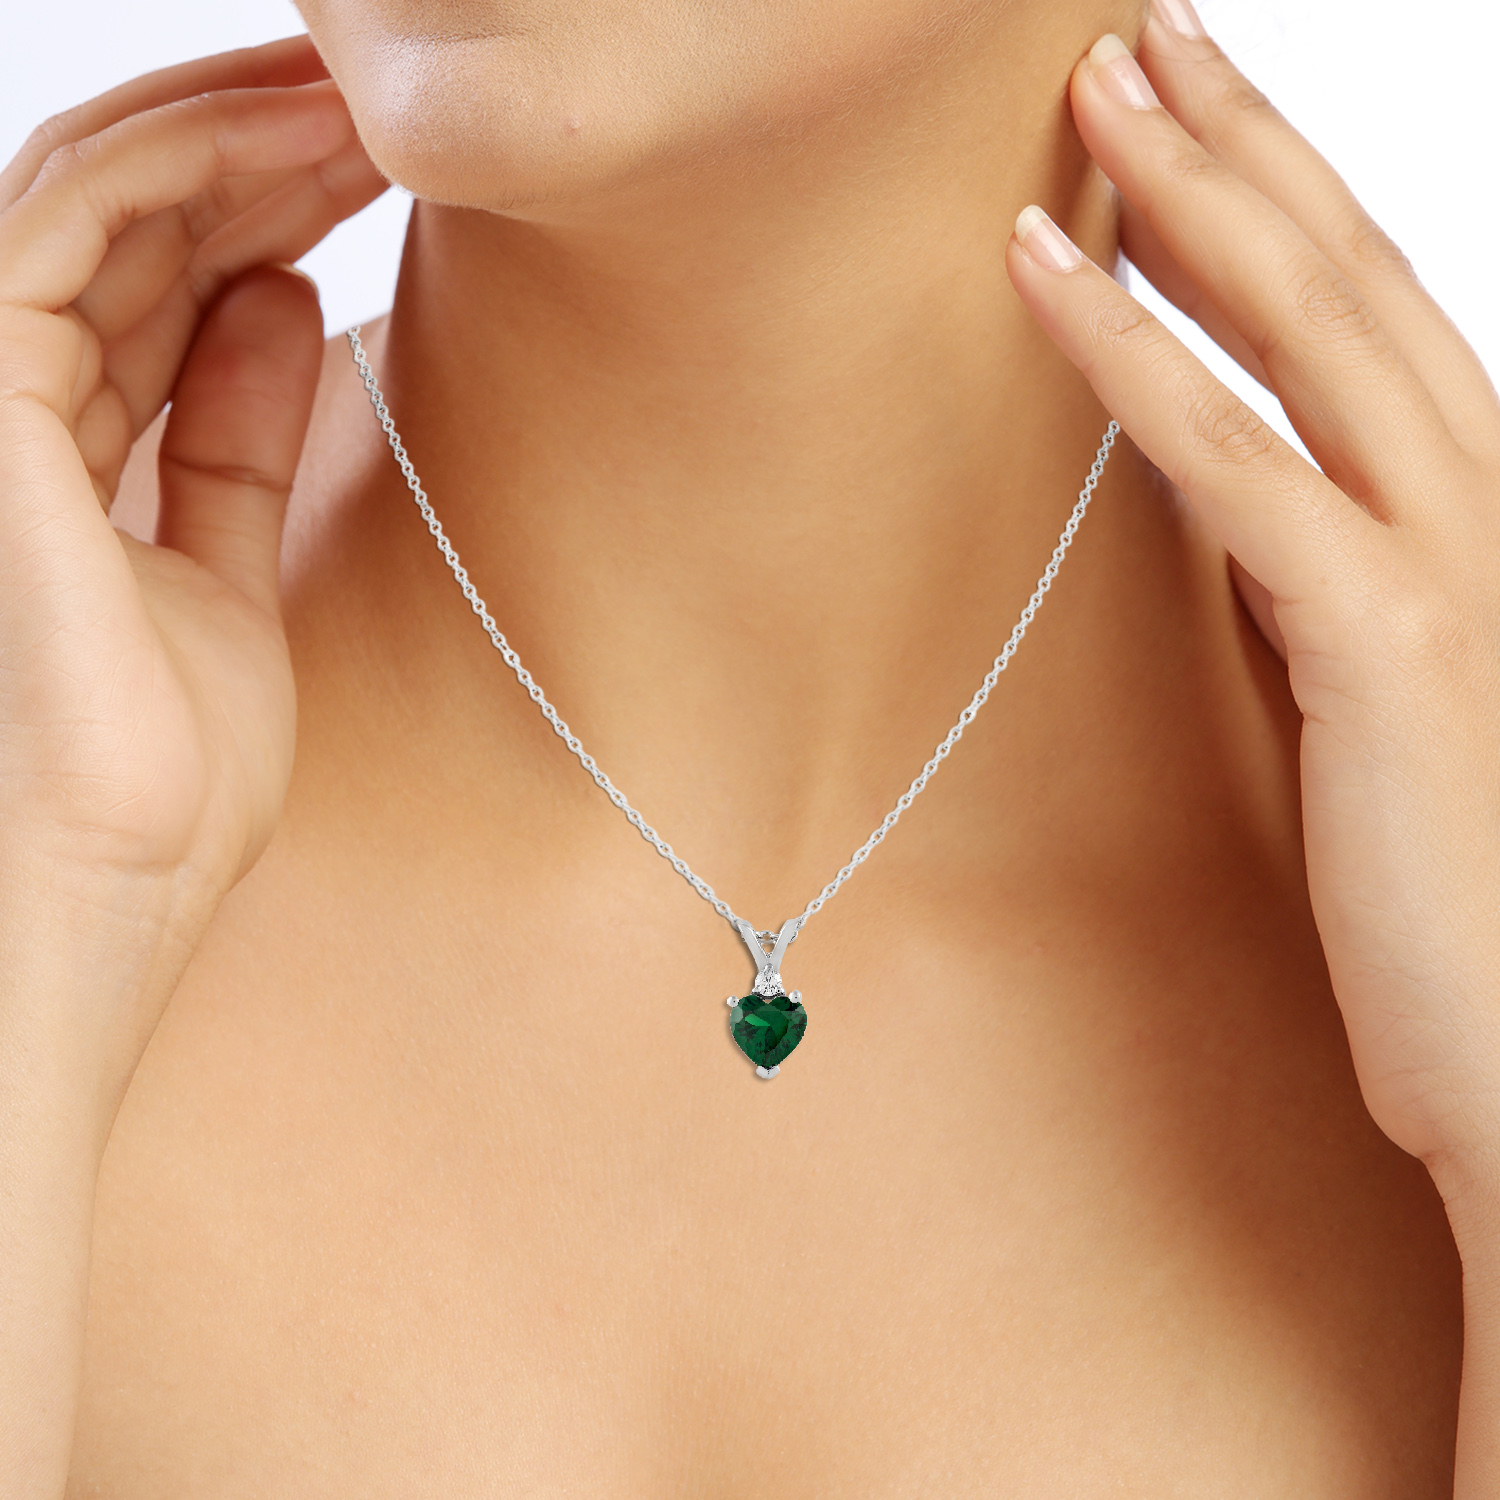 Precious Heart Shaped Emerald Necklace | Initial Necklace